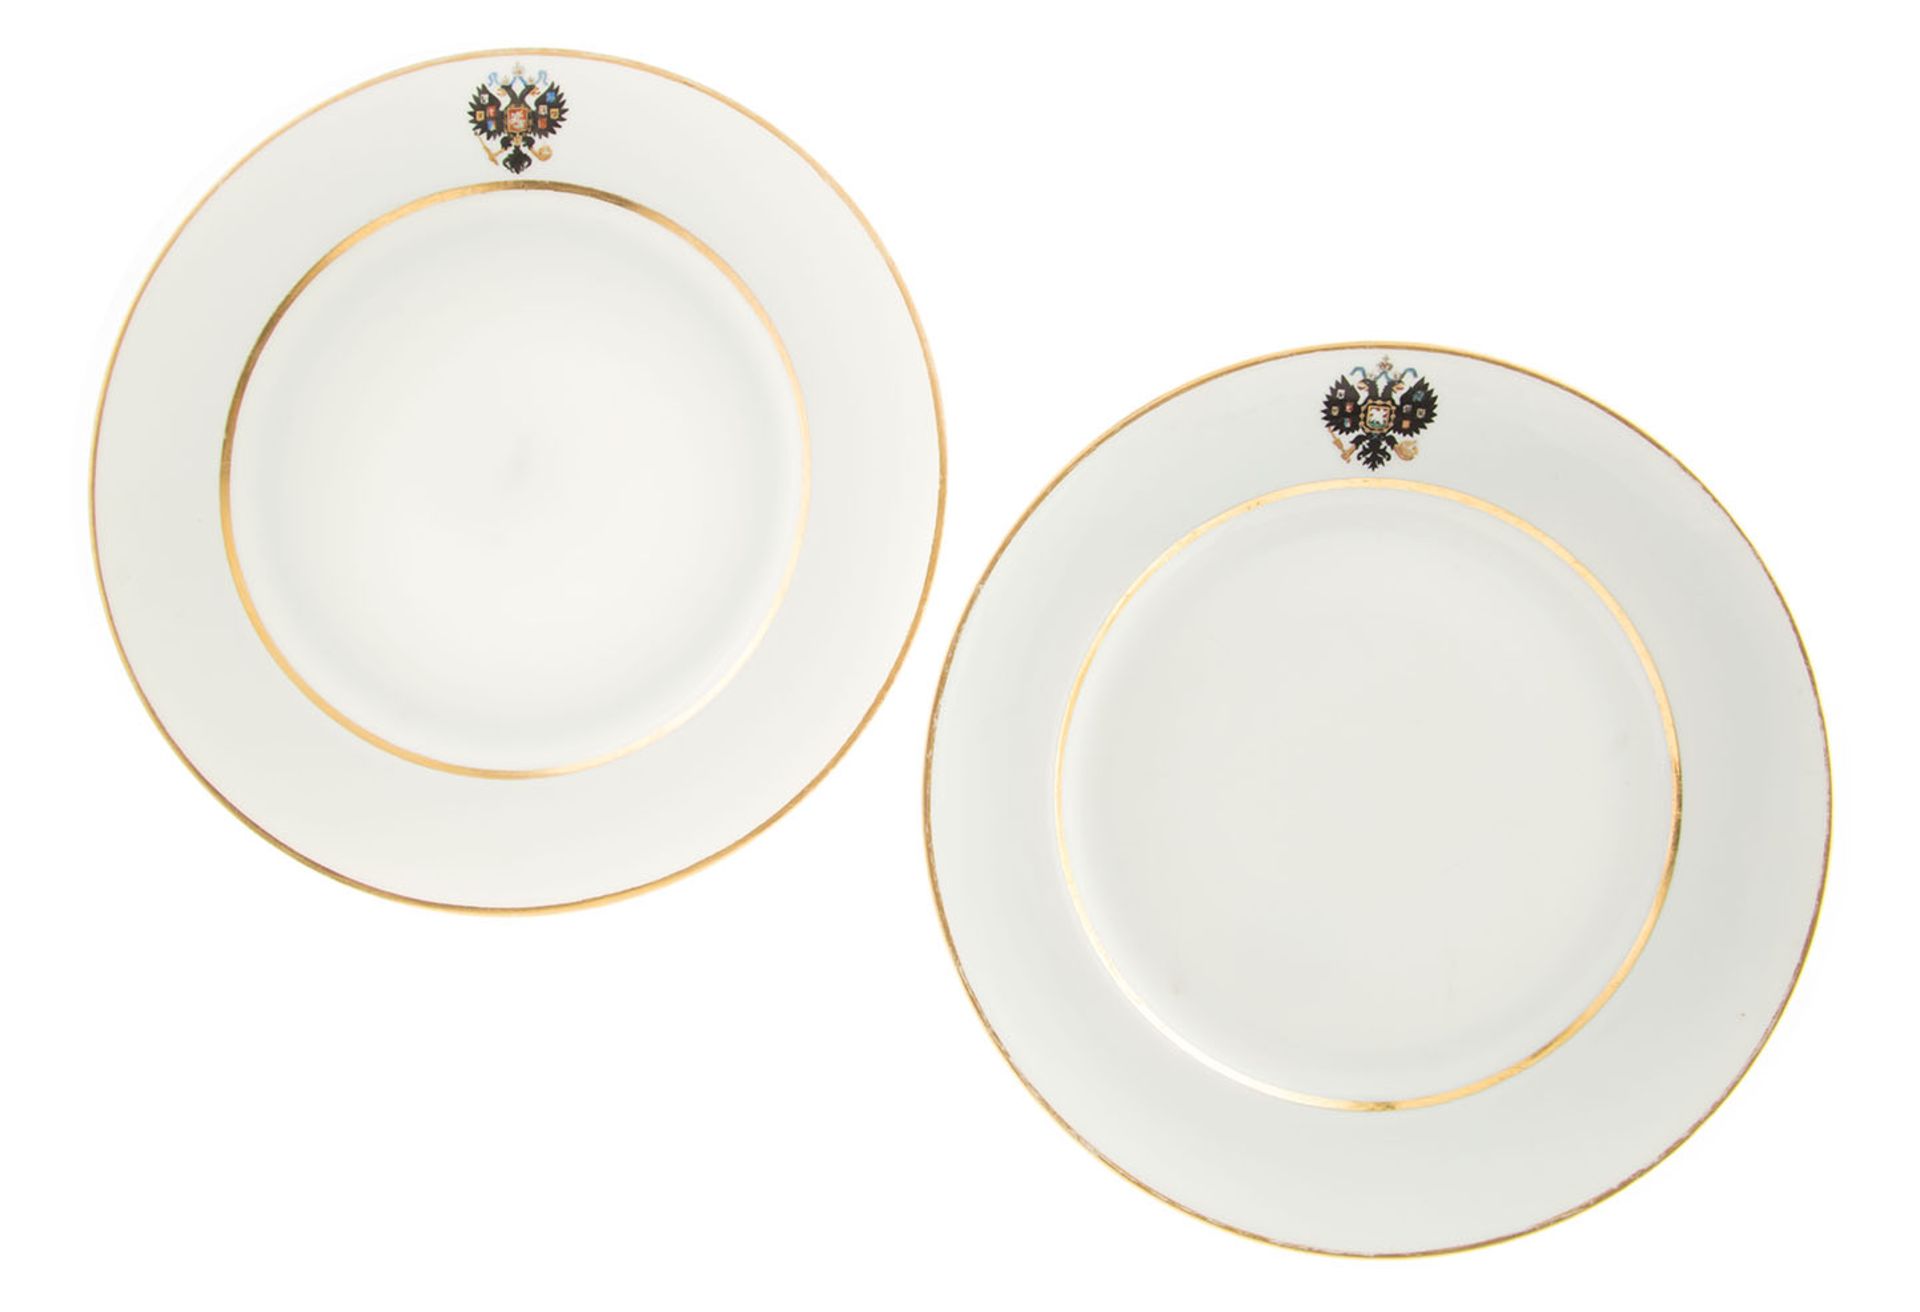 WO PLATES FROM THE ‘SERVICE OF A NEW TYPE WITH RUSSIAN COAT OF ARMS’: CORONATION [...]